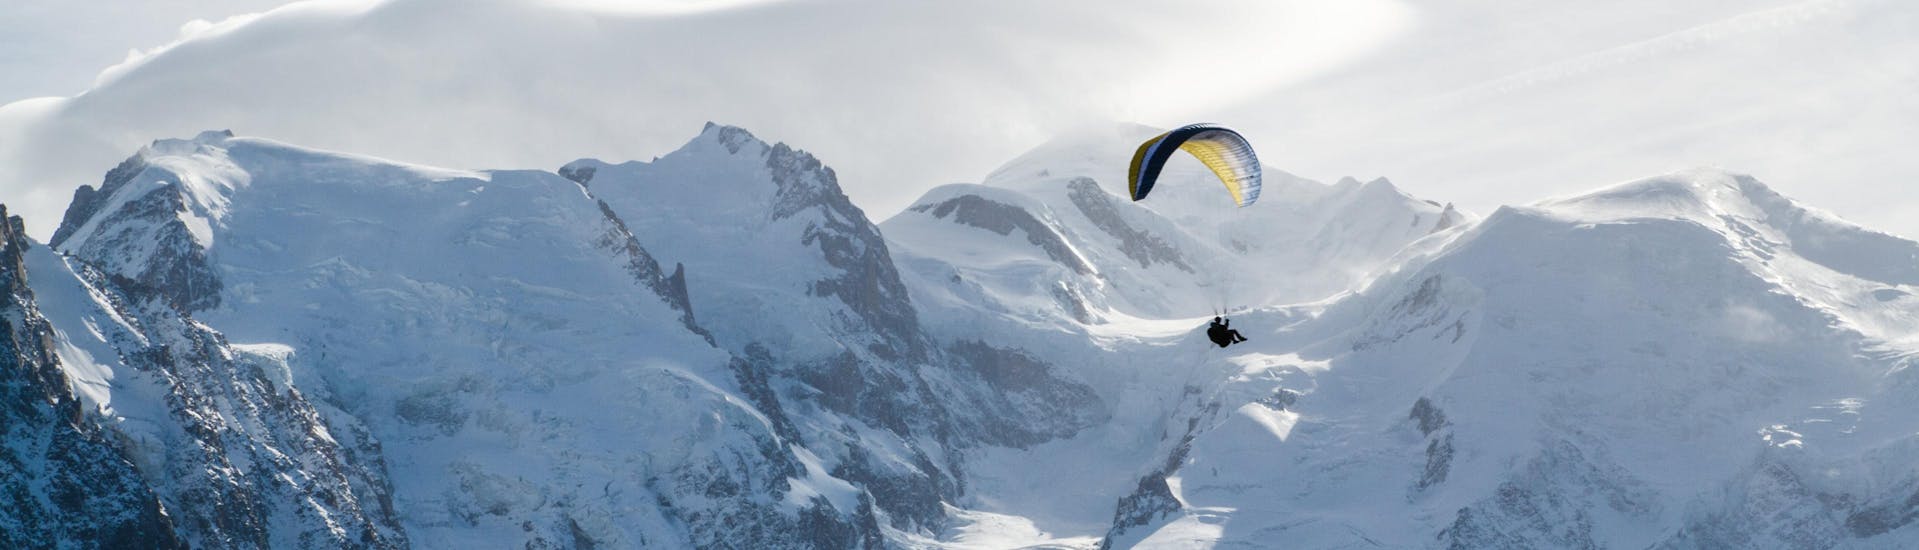 A person is doing a paragliding flight in the Chamonix valley from Plan Praz with the snowy mountains in the background.